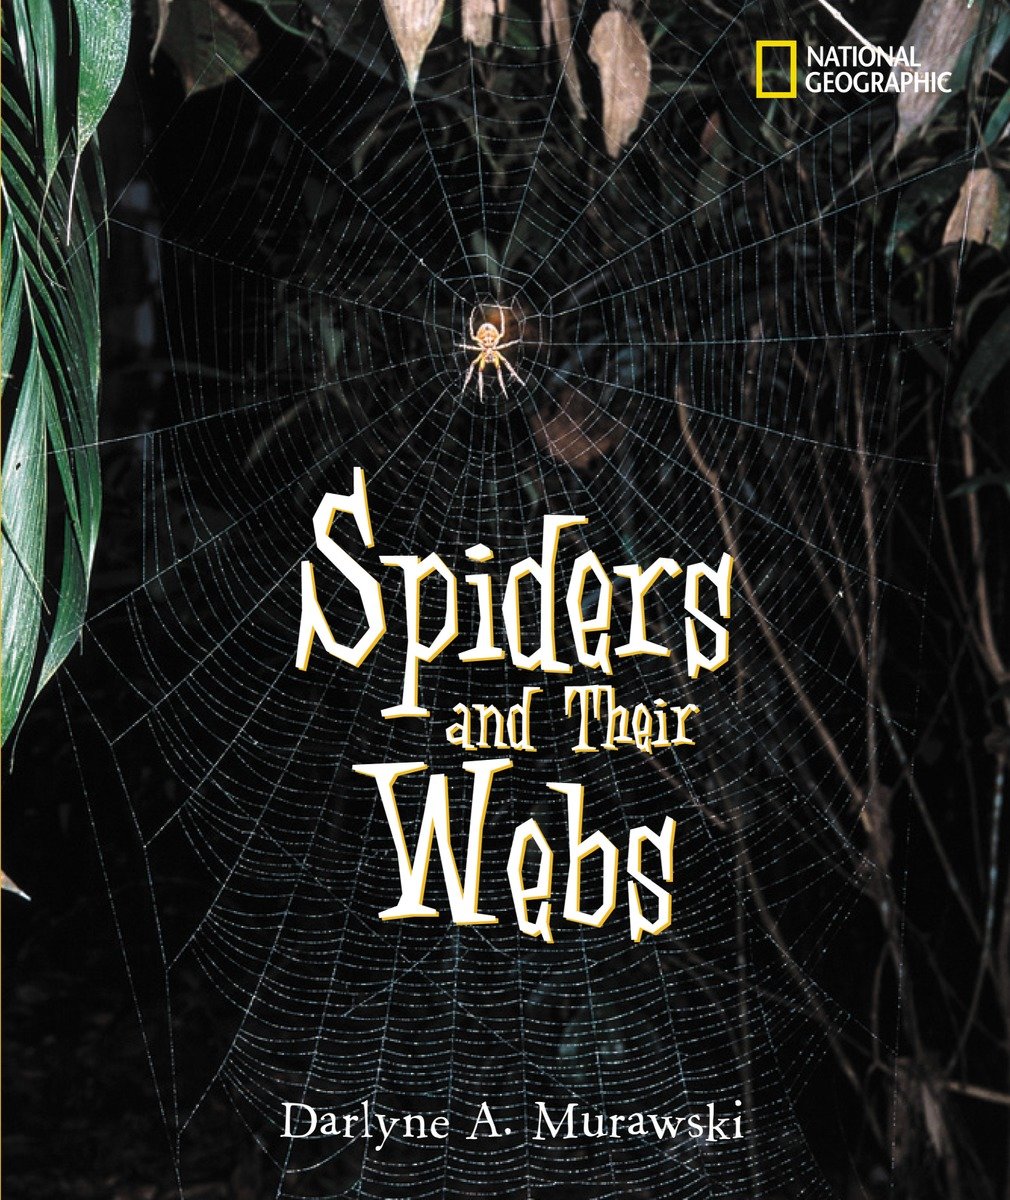 Spiders And Their Webs (Hardcover Book)